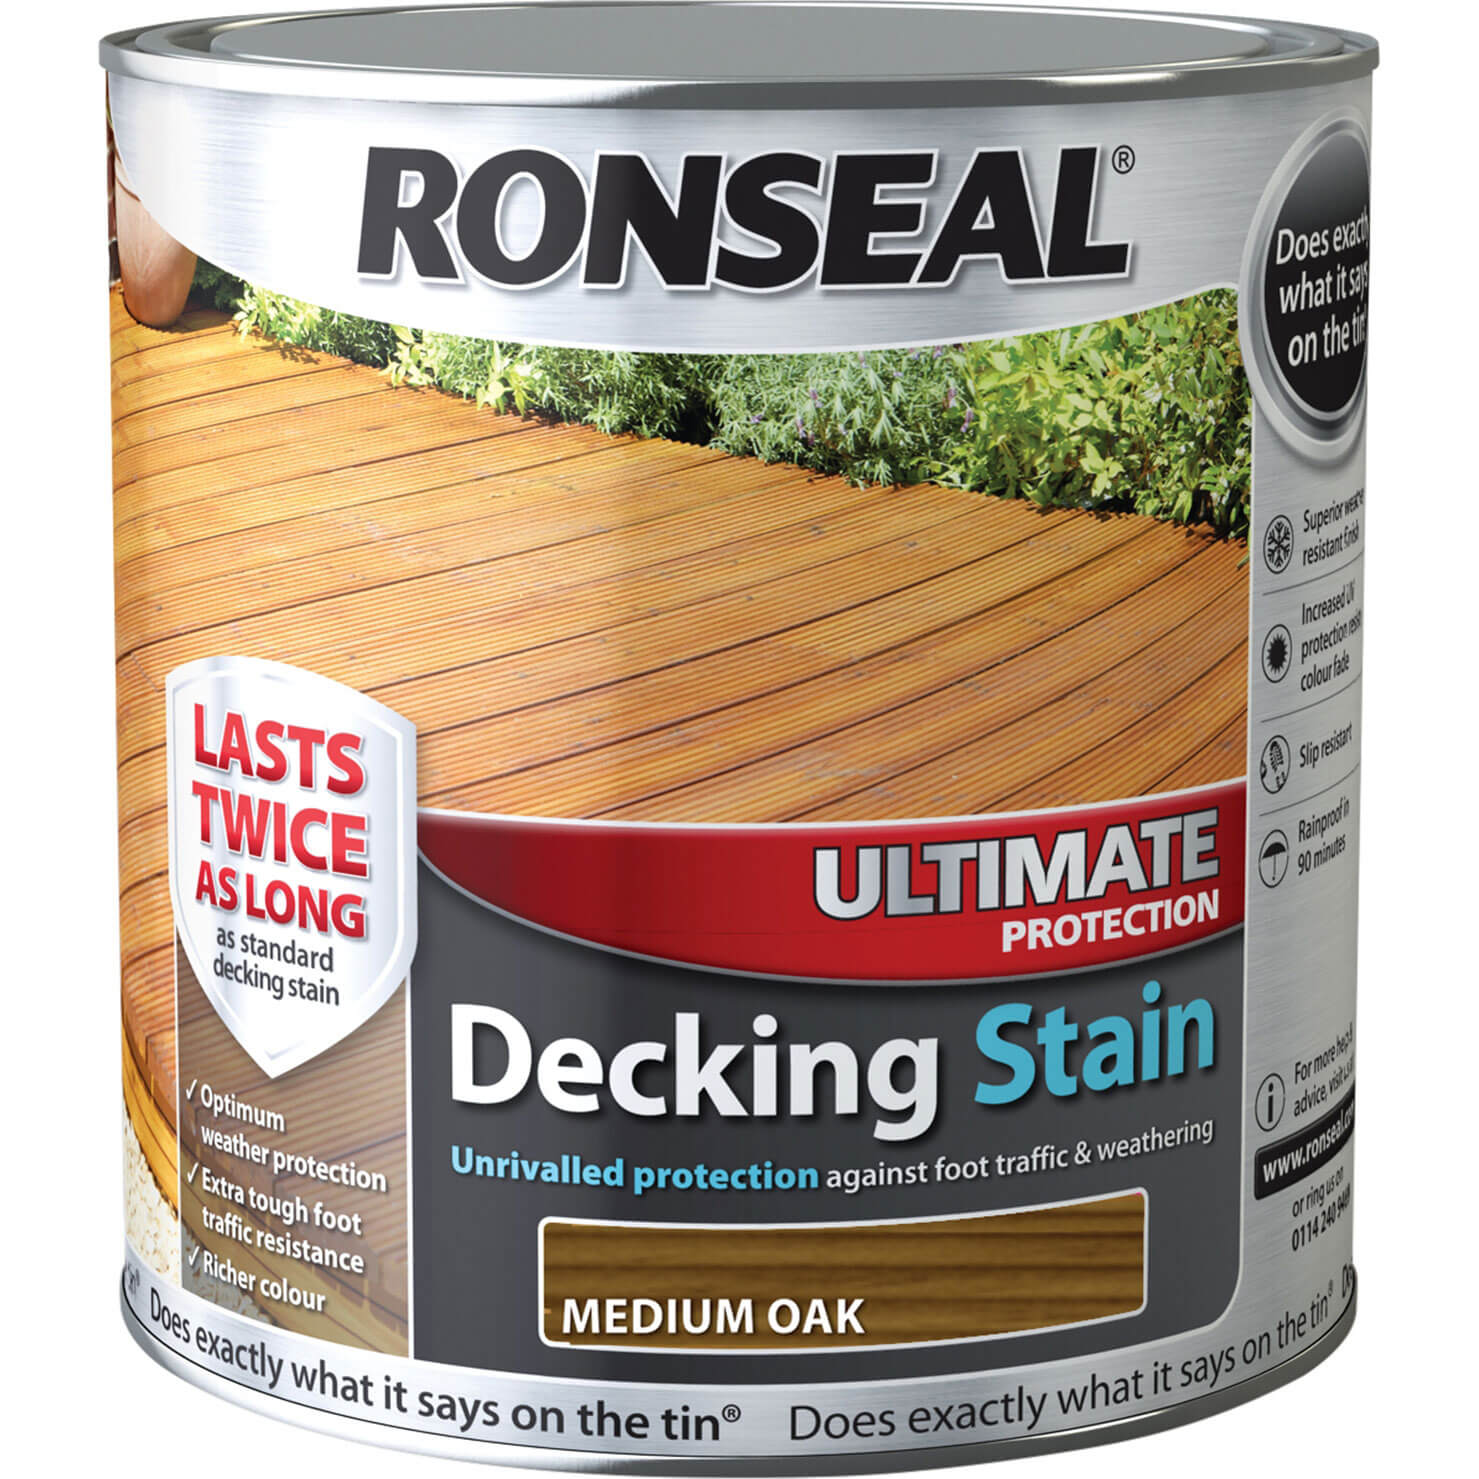 Ronseal Ultimate Protection Decking Stain Medium Oak 2.5l